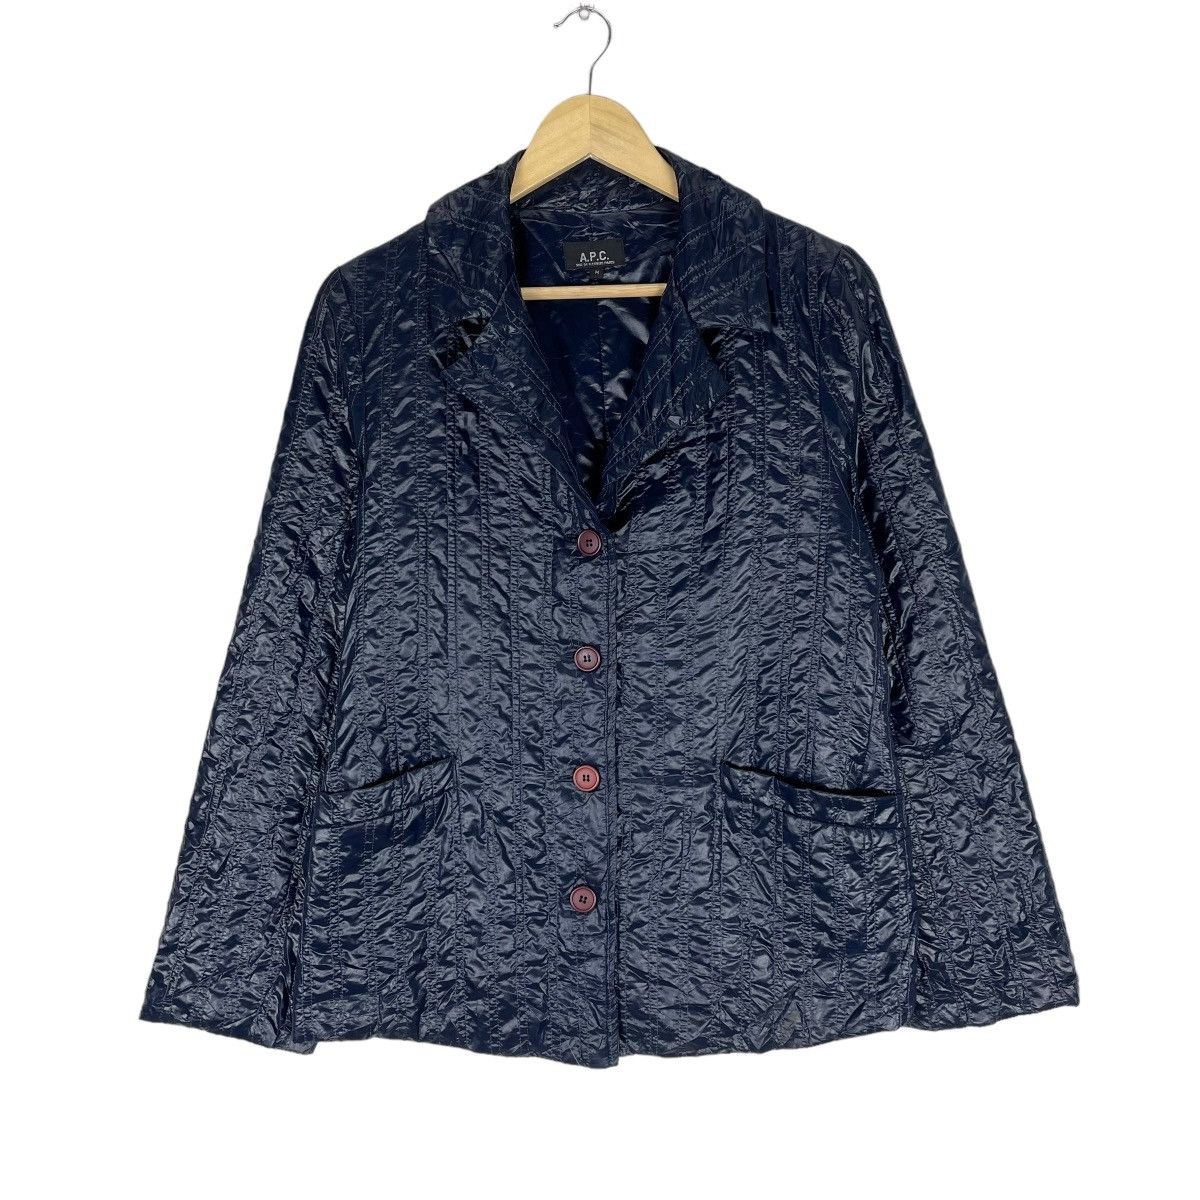 ❄️A.P.C FRANCE QUILTED BUTTON JACKET - 1